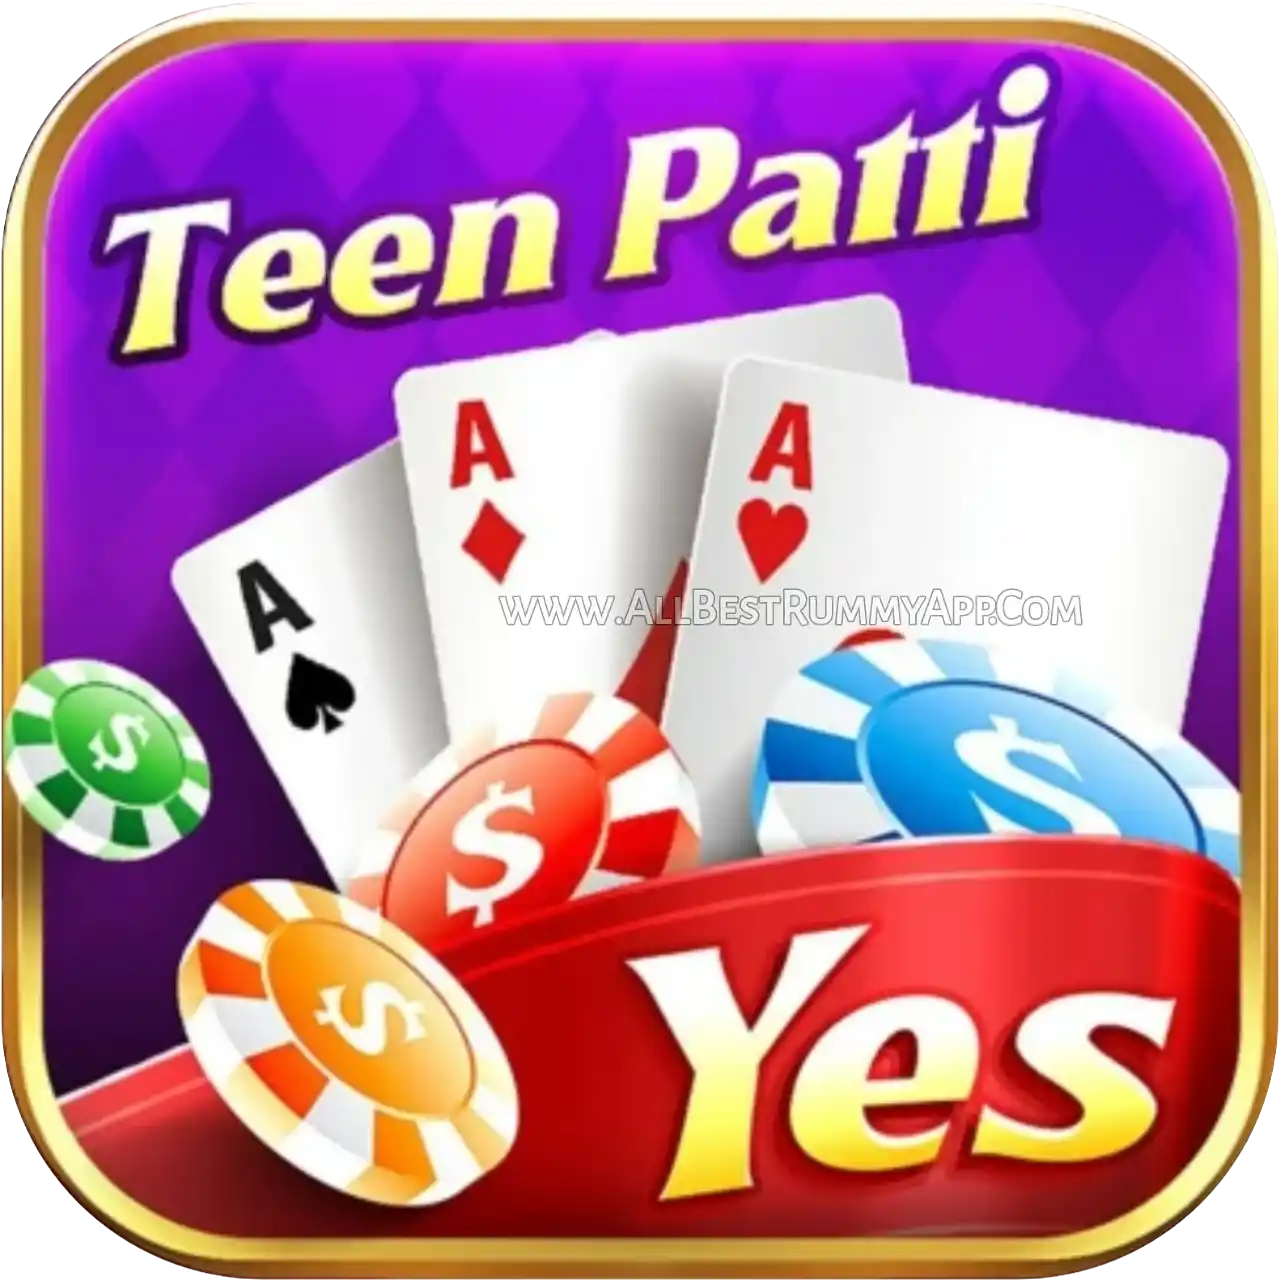 Teen Patti Yes APK - India Game Download